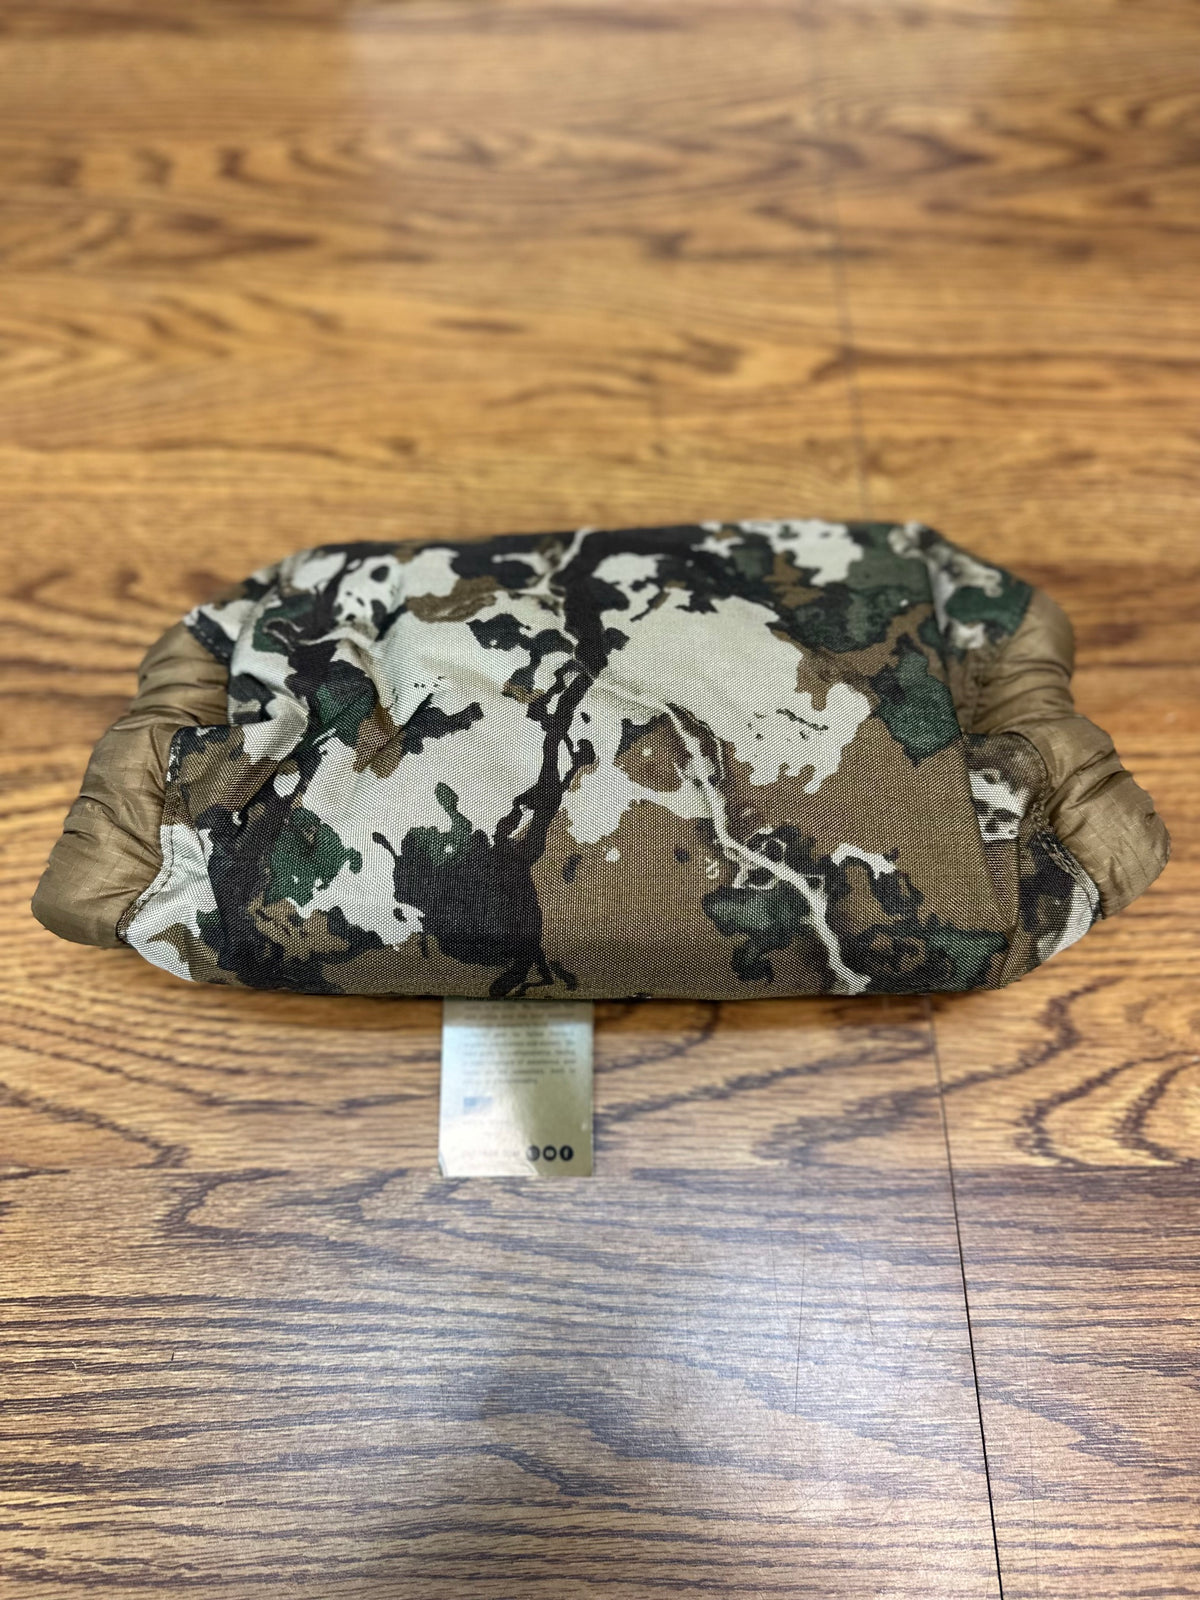 FHF MOLLE-Muff - First Lite Fusion pattern